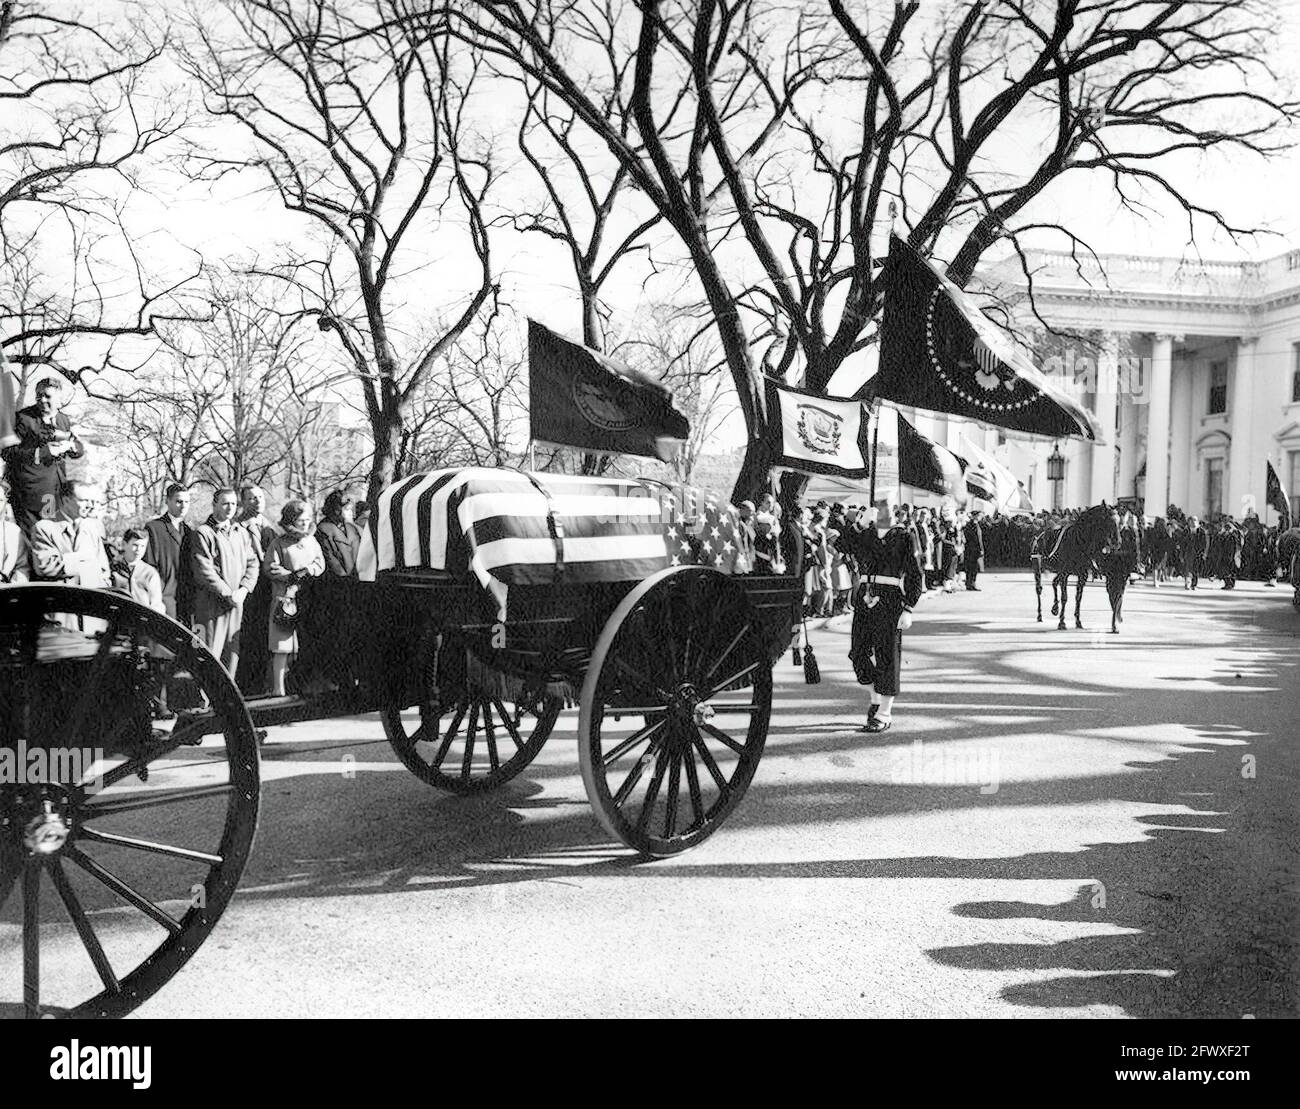 The funeral procession of President John F. Kennedy departs the White House for the Cathedral of St. Matthew the Apostle; the flag-draped casket of President Kennedy is borne by a horse-drawn caisson. Riderless horse, Black Jack (led by Private First Class Arthur A. Carlson), walks at right; mourners and members of the color guard line the North Lawn driveway. White House, Washington, D.C. Stock Photo